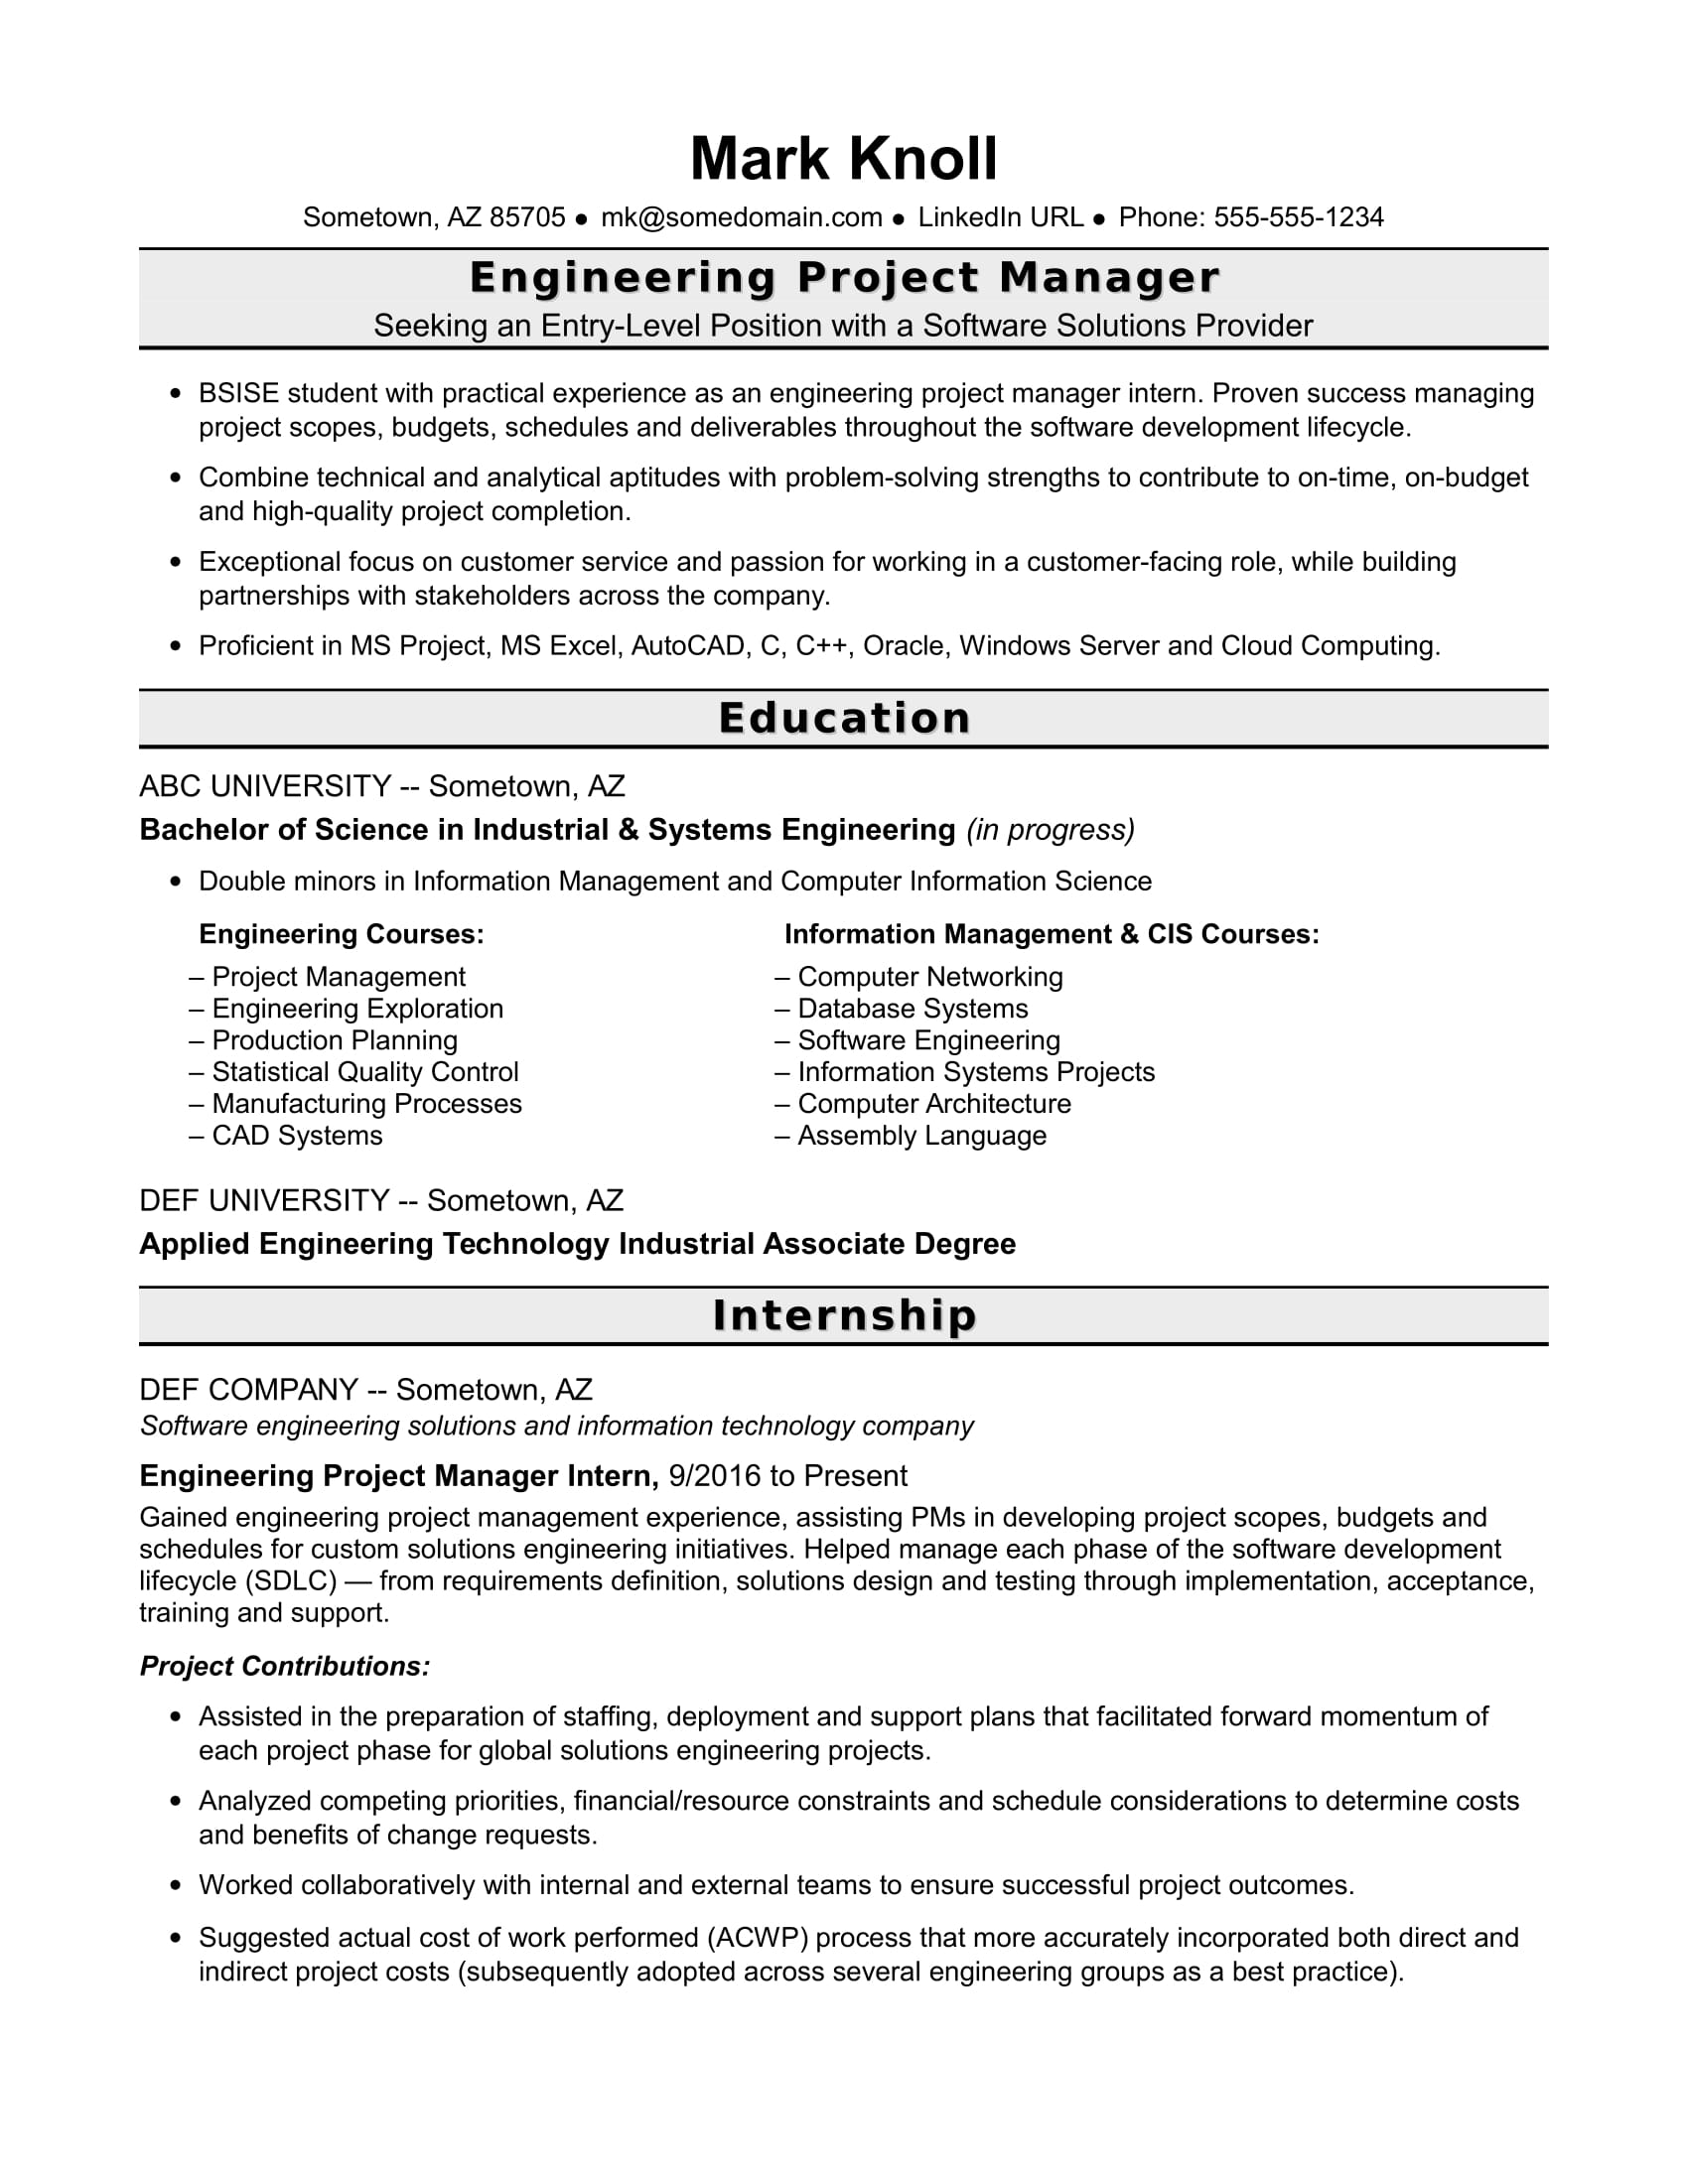 Sample Resume For An Entry Level Engineering Project Manager